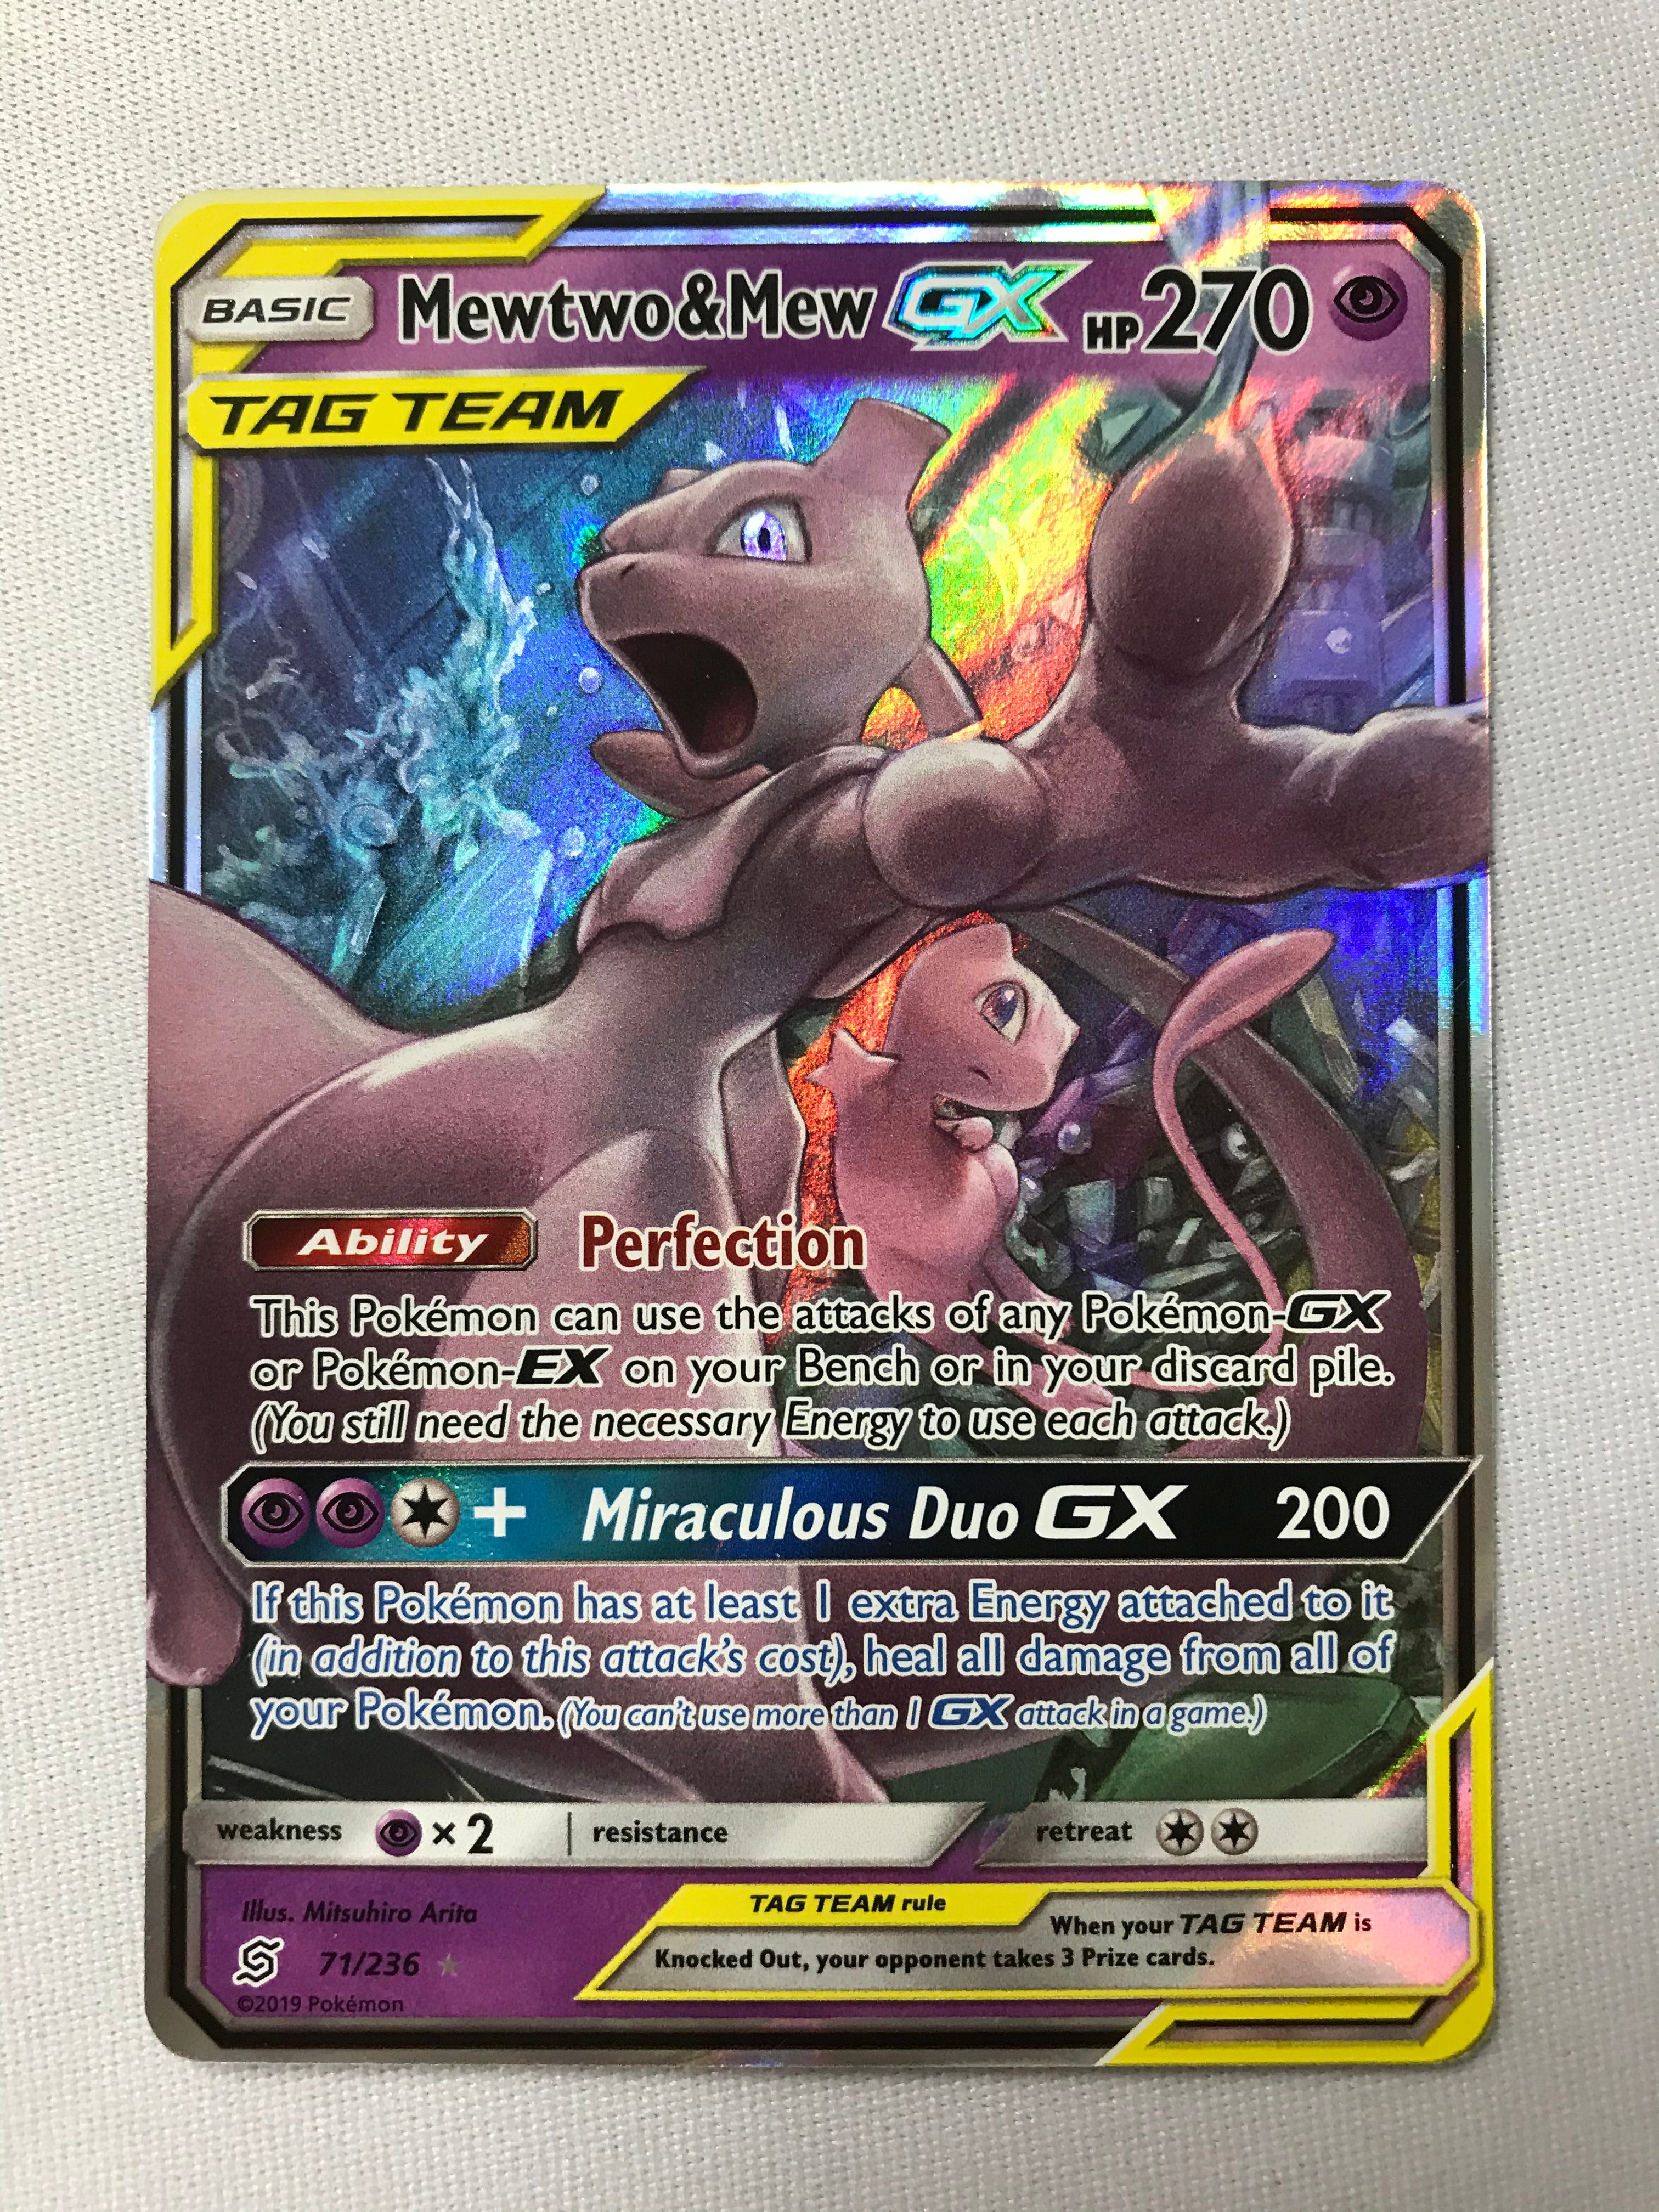 Check the actual price of your Mewtwo & Mew-GX 222/236 Pokemon card